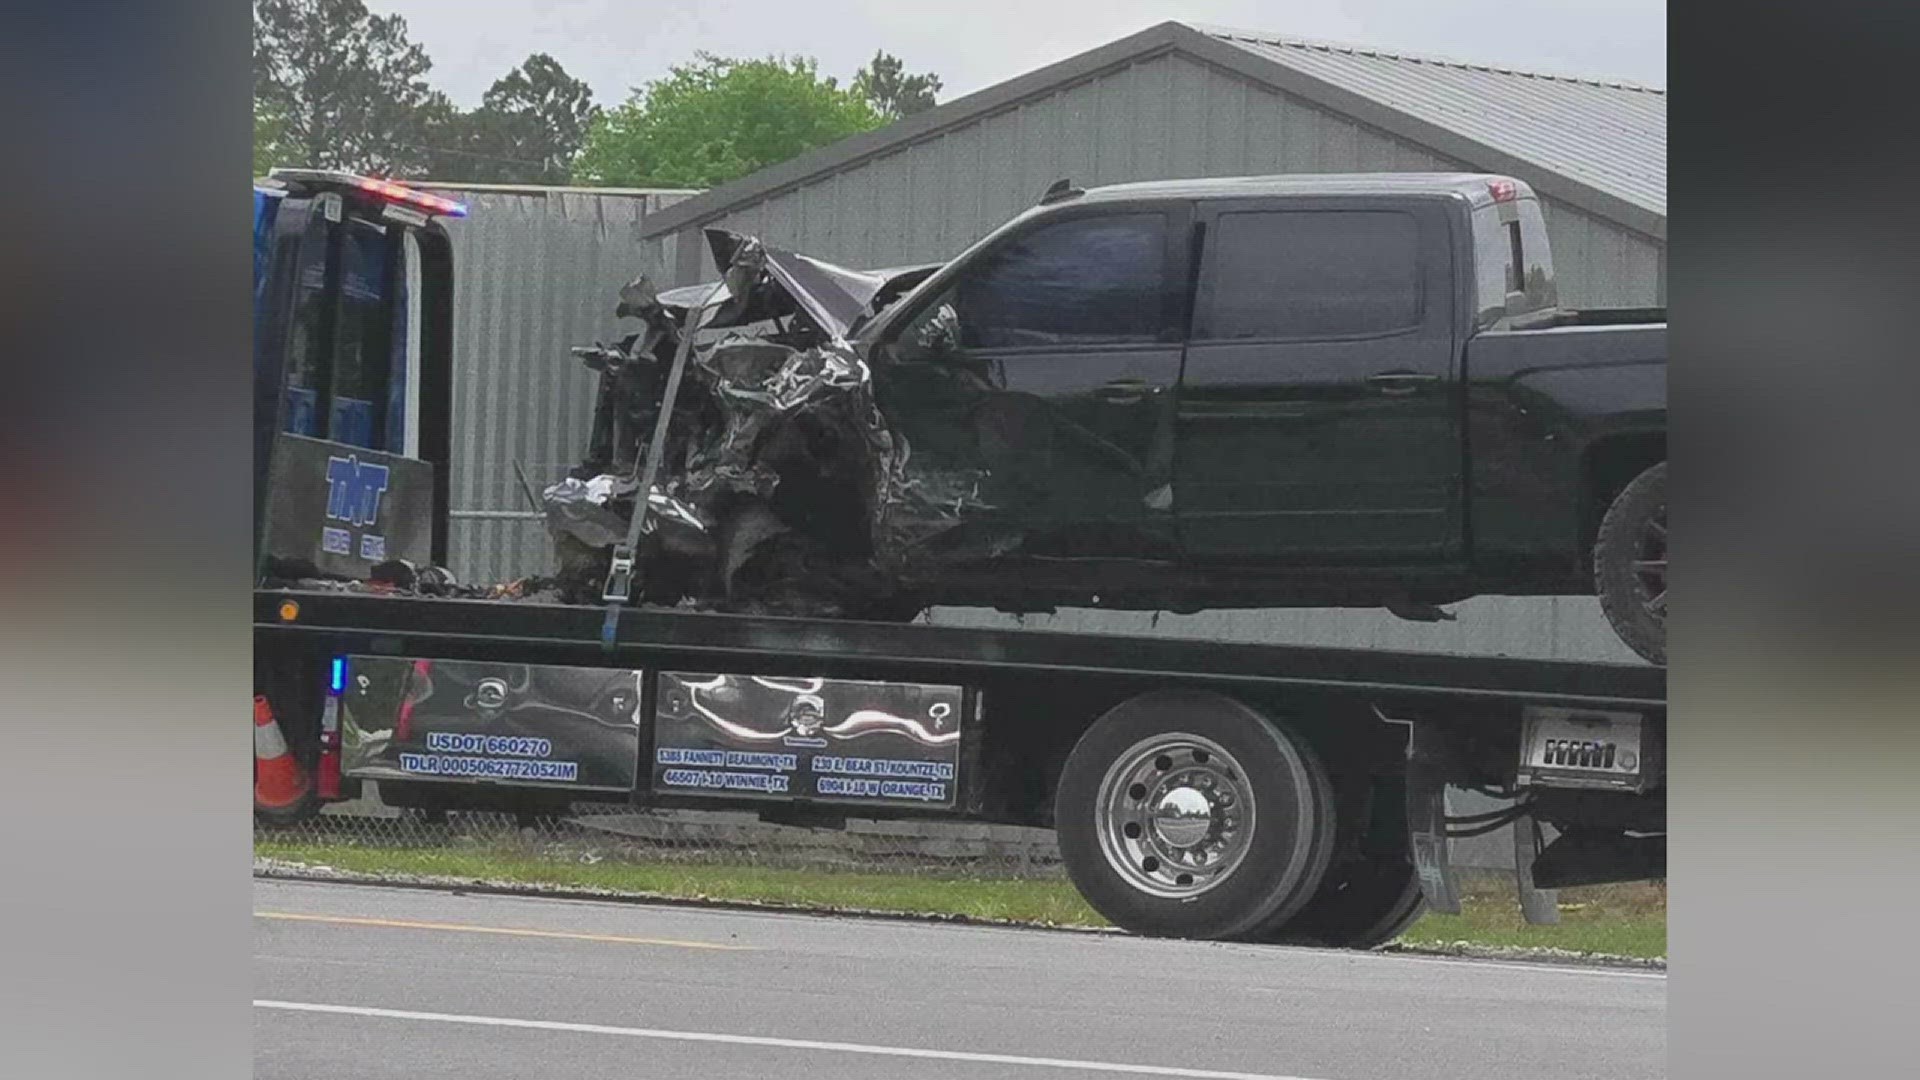 Around 9 a.m. a Chevrolet Silverado was traveling north, while a Ford Explorer was traveling south on near Dugat Road.